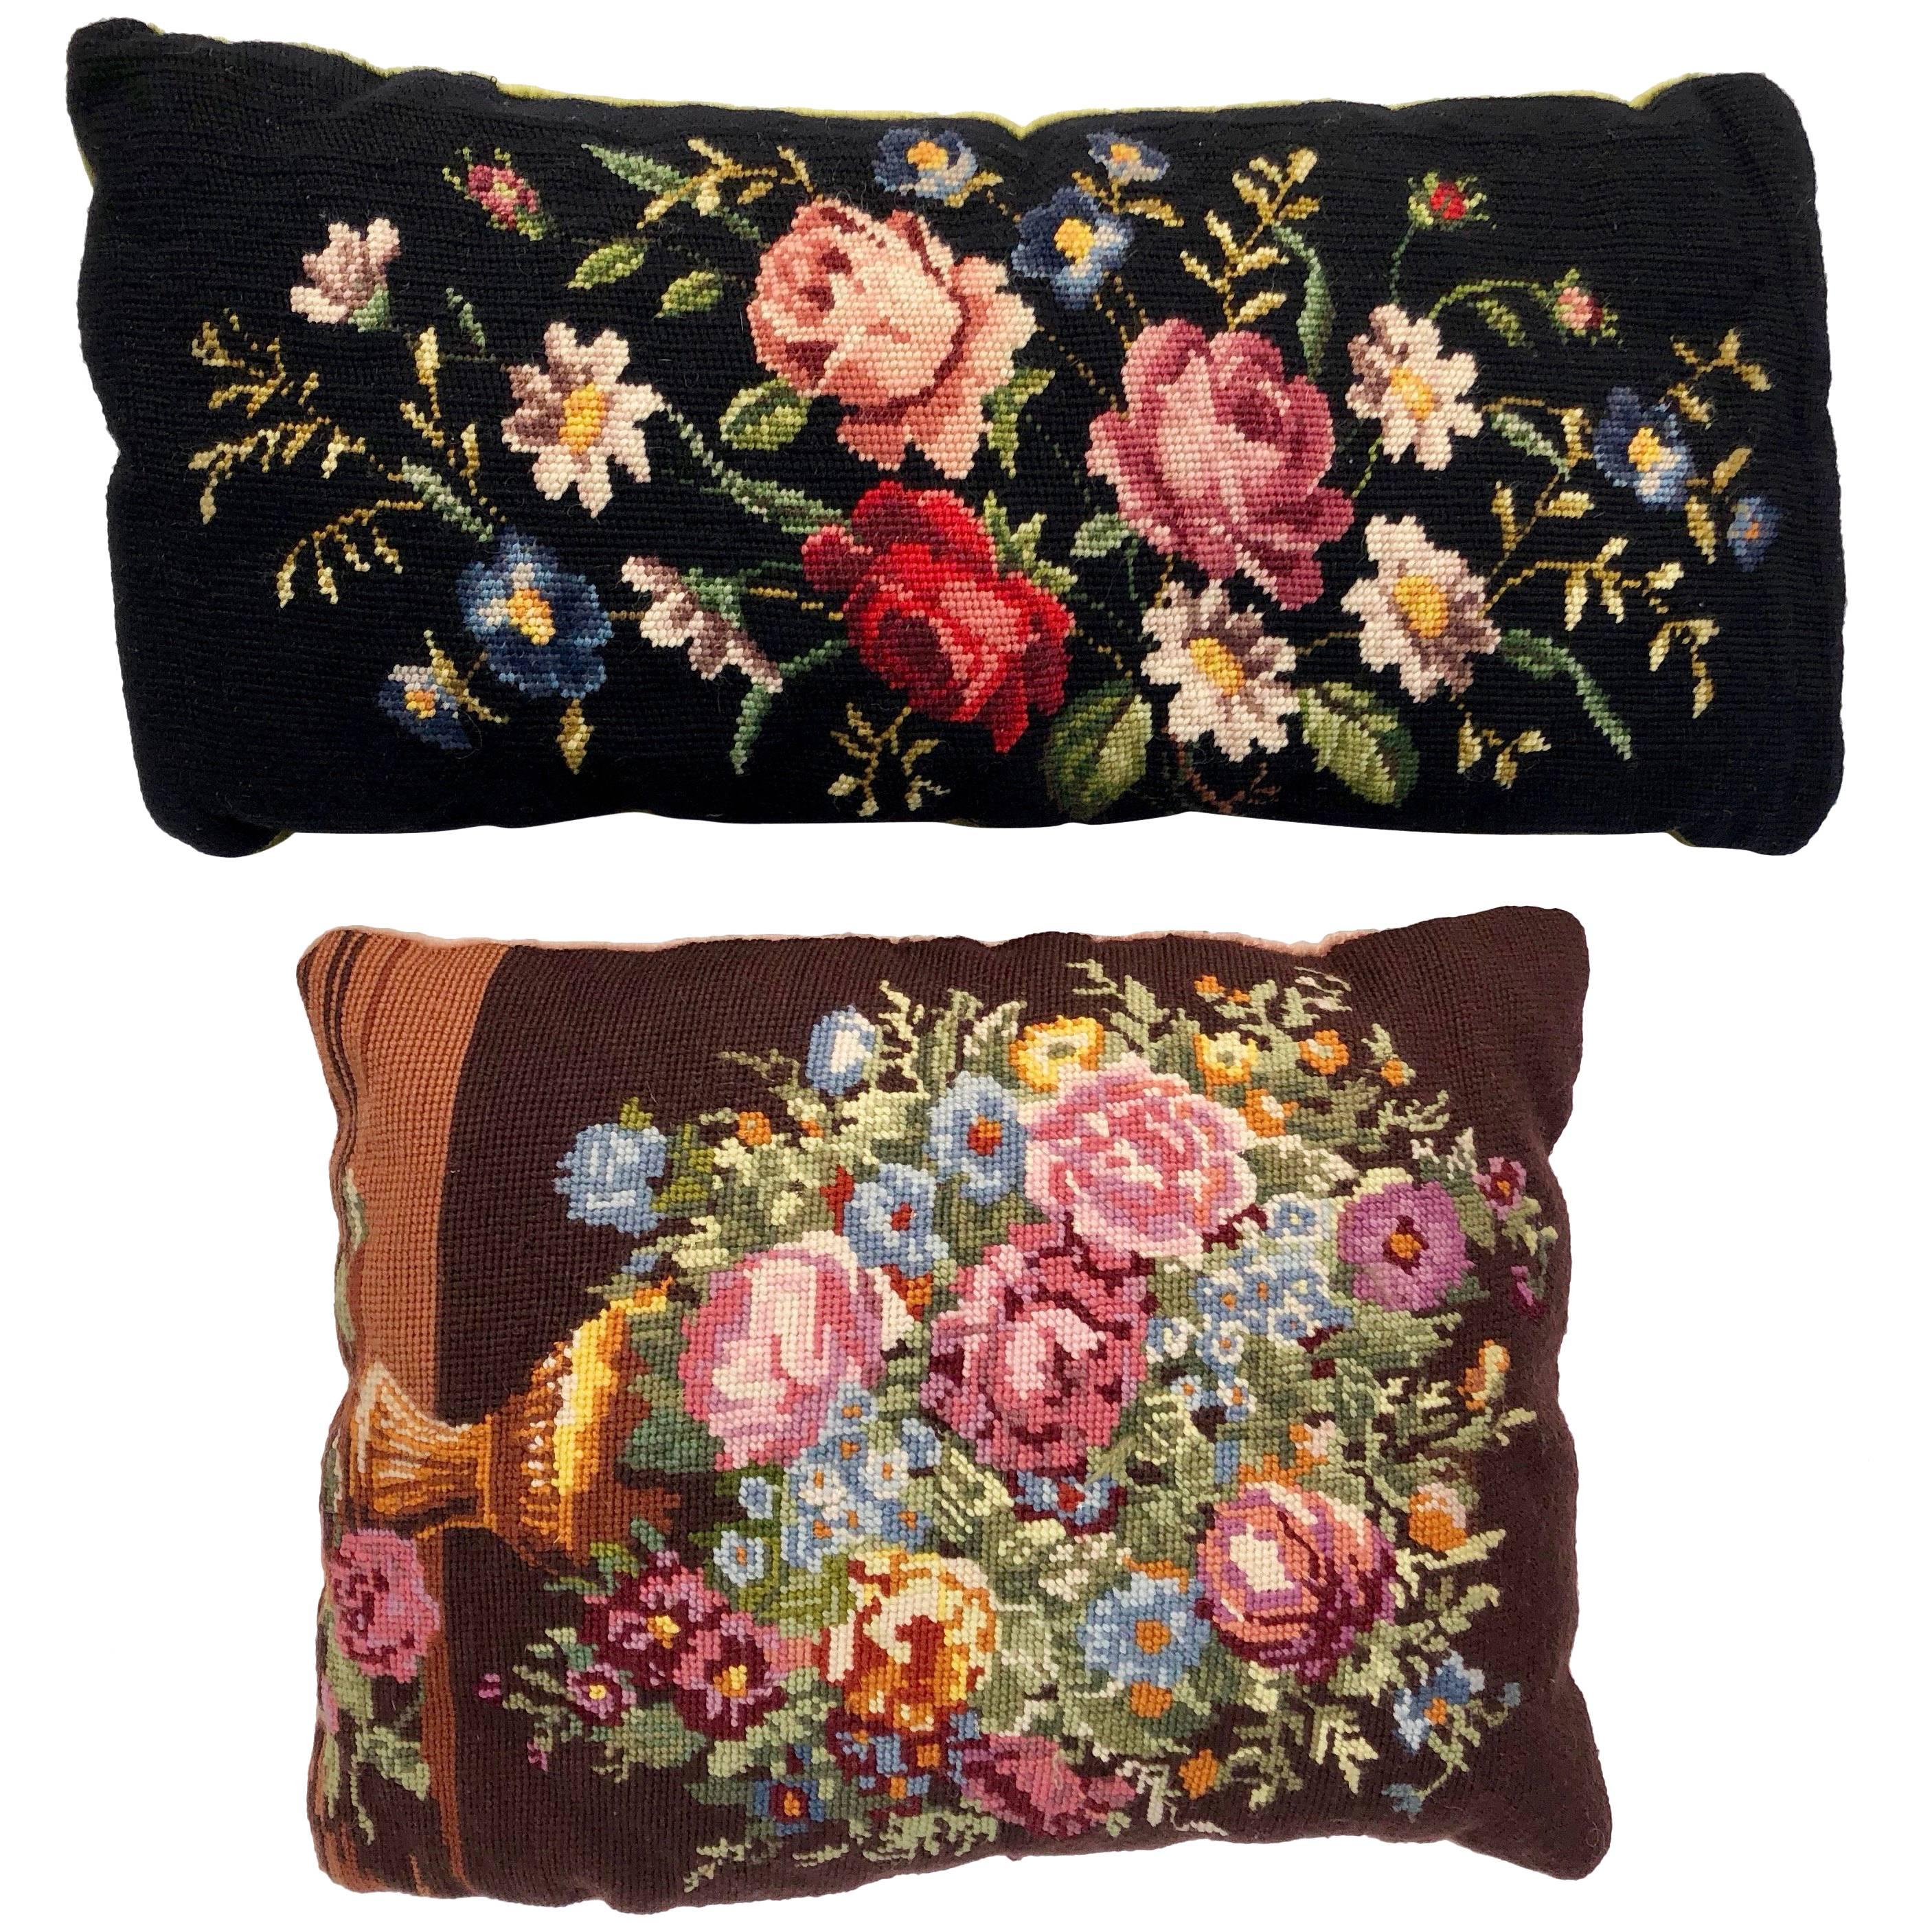 Two French Embroidered Throw Pillows in Floral Design with Velvet Backing, 1950s For Sale